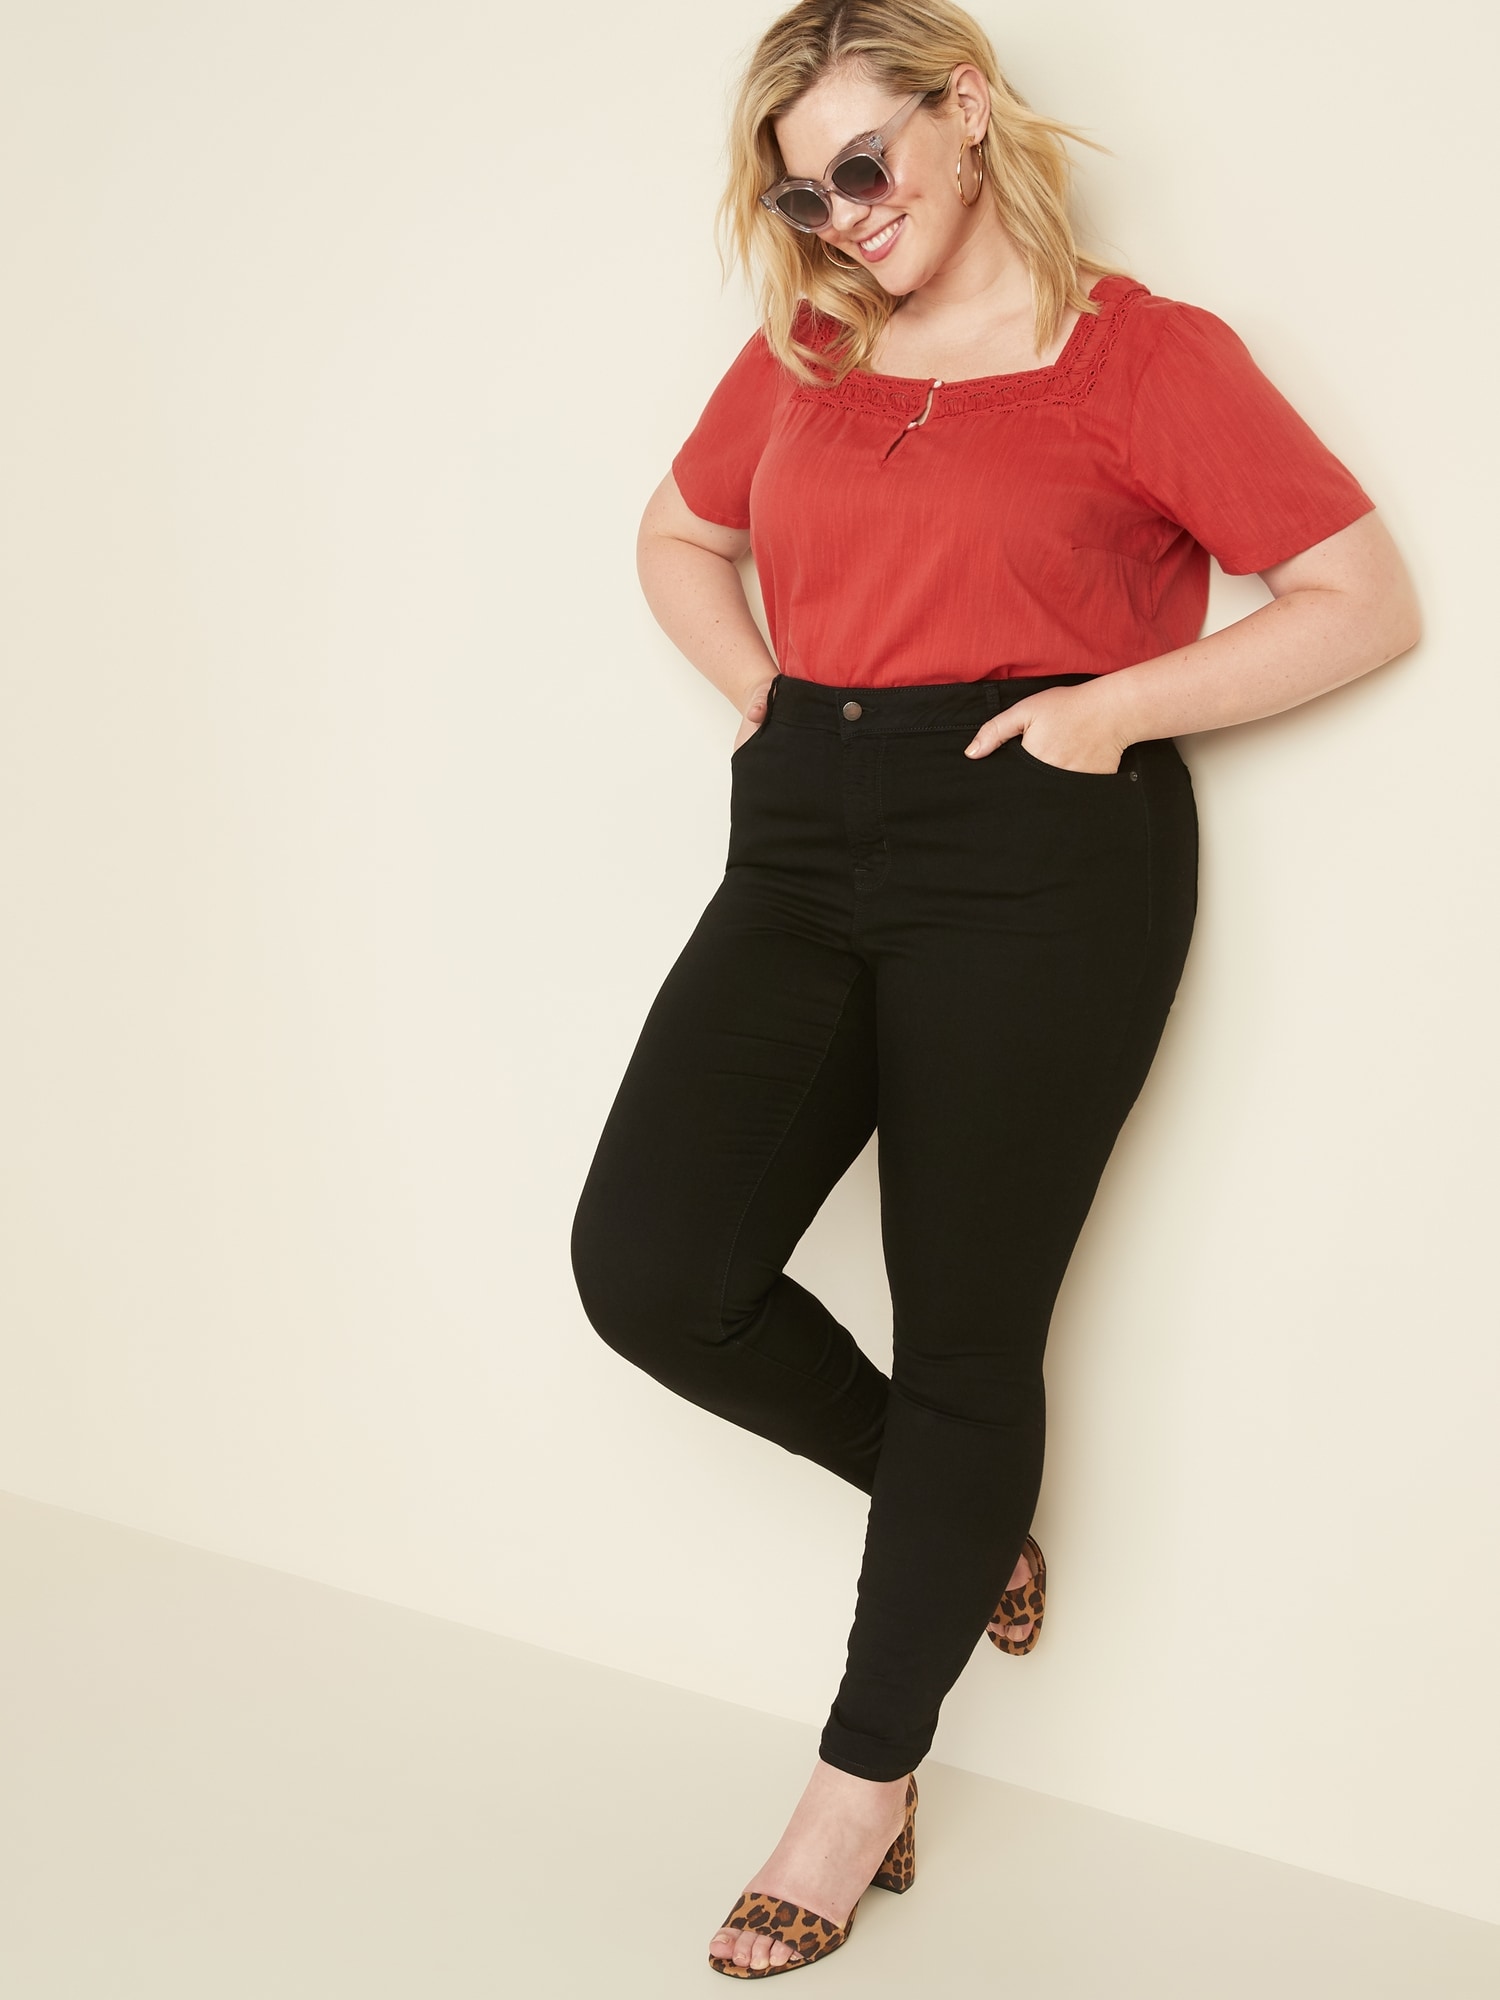 old navy black high waisted jeans